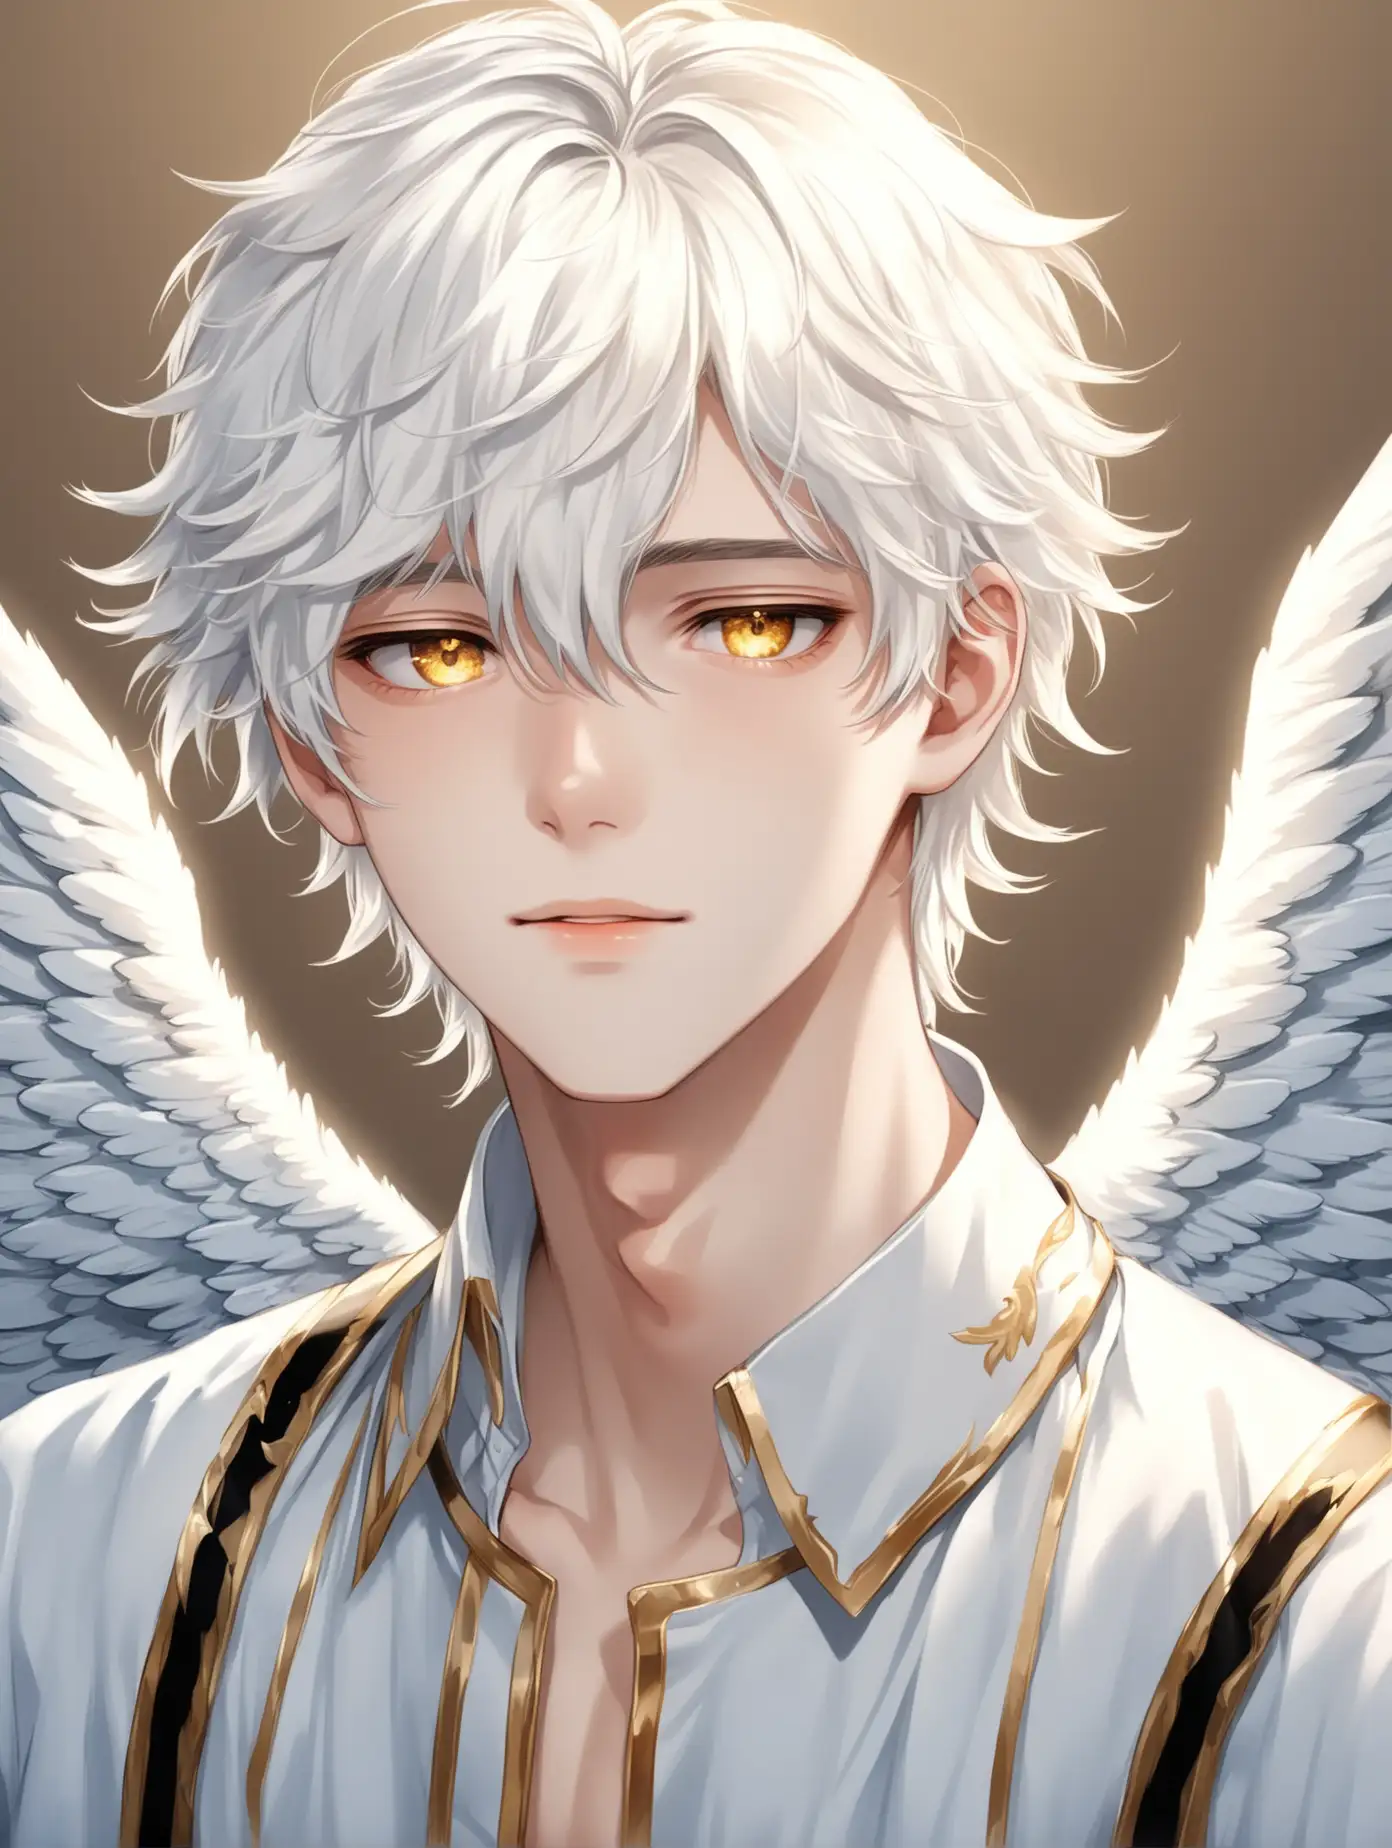 A 19-year-old boy with an angelic appearance.  Angel Face.  White hair, golden eyes.  A very beautiful youthful face.  Sexy boy.  Kind face.